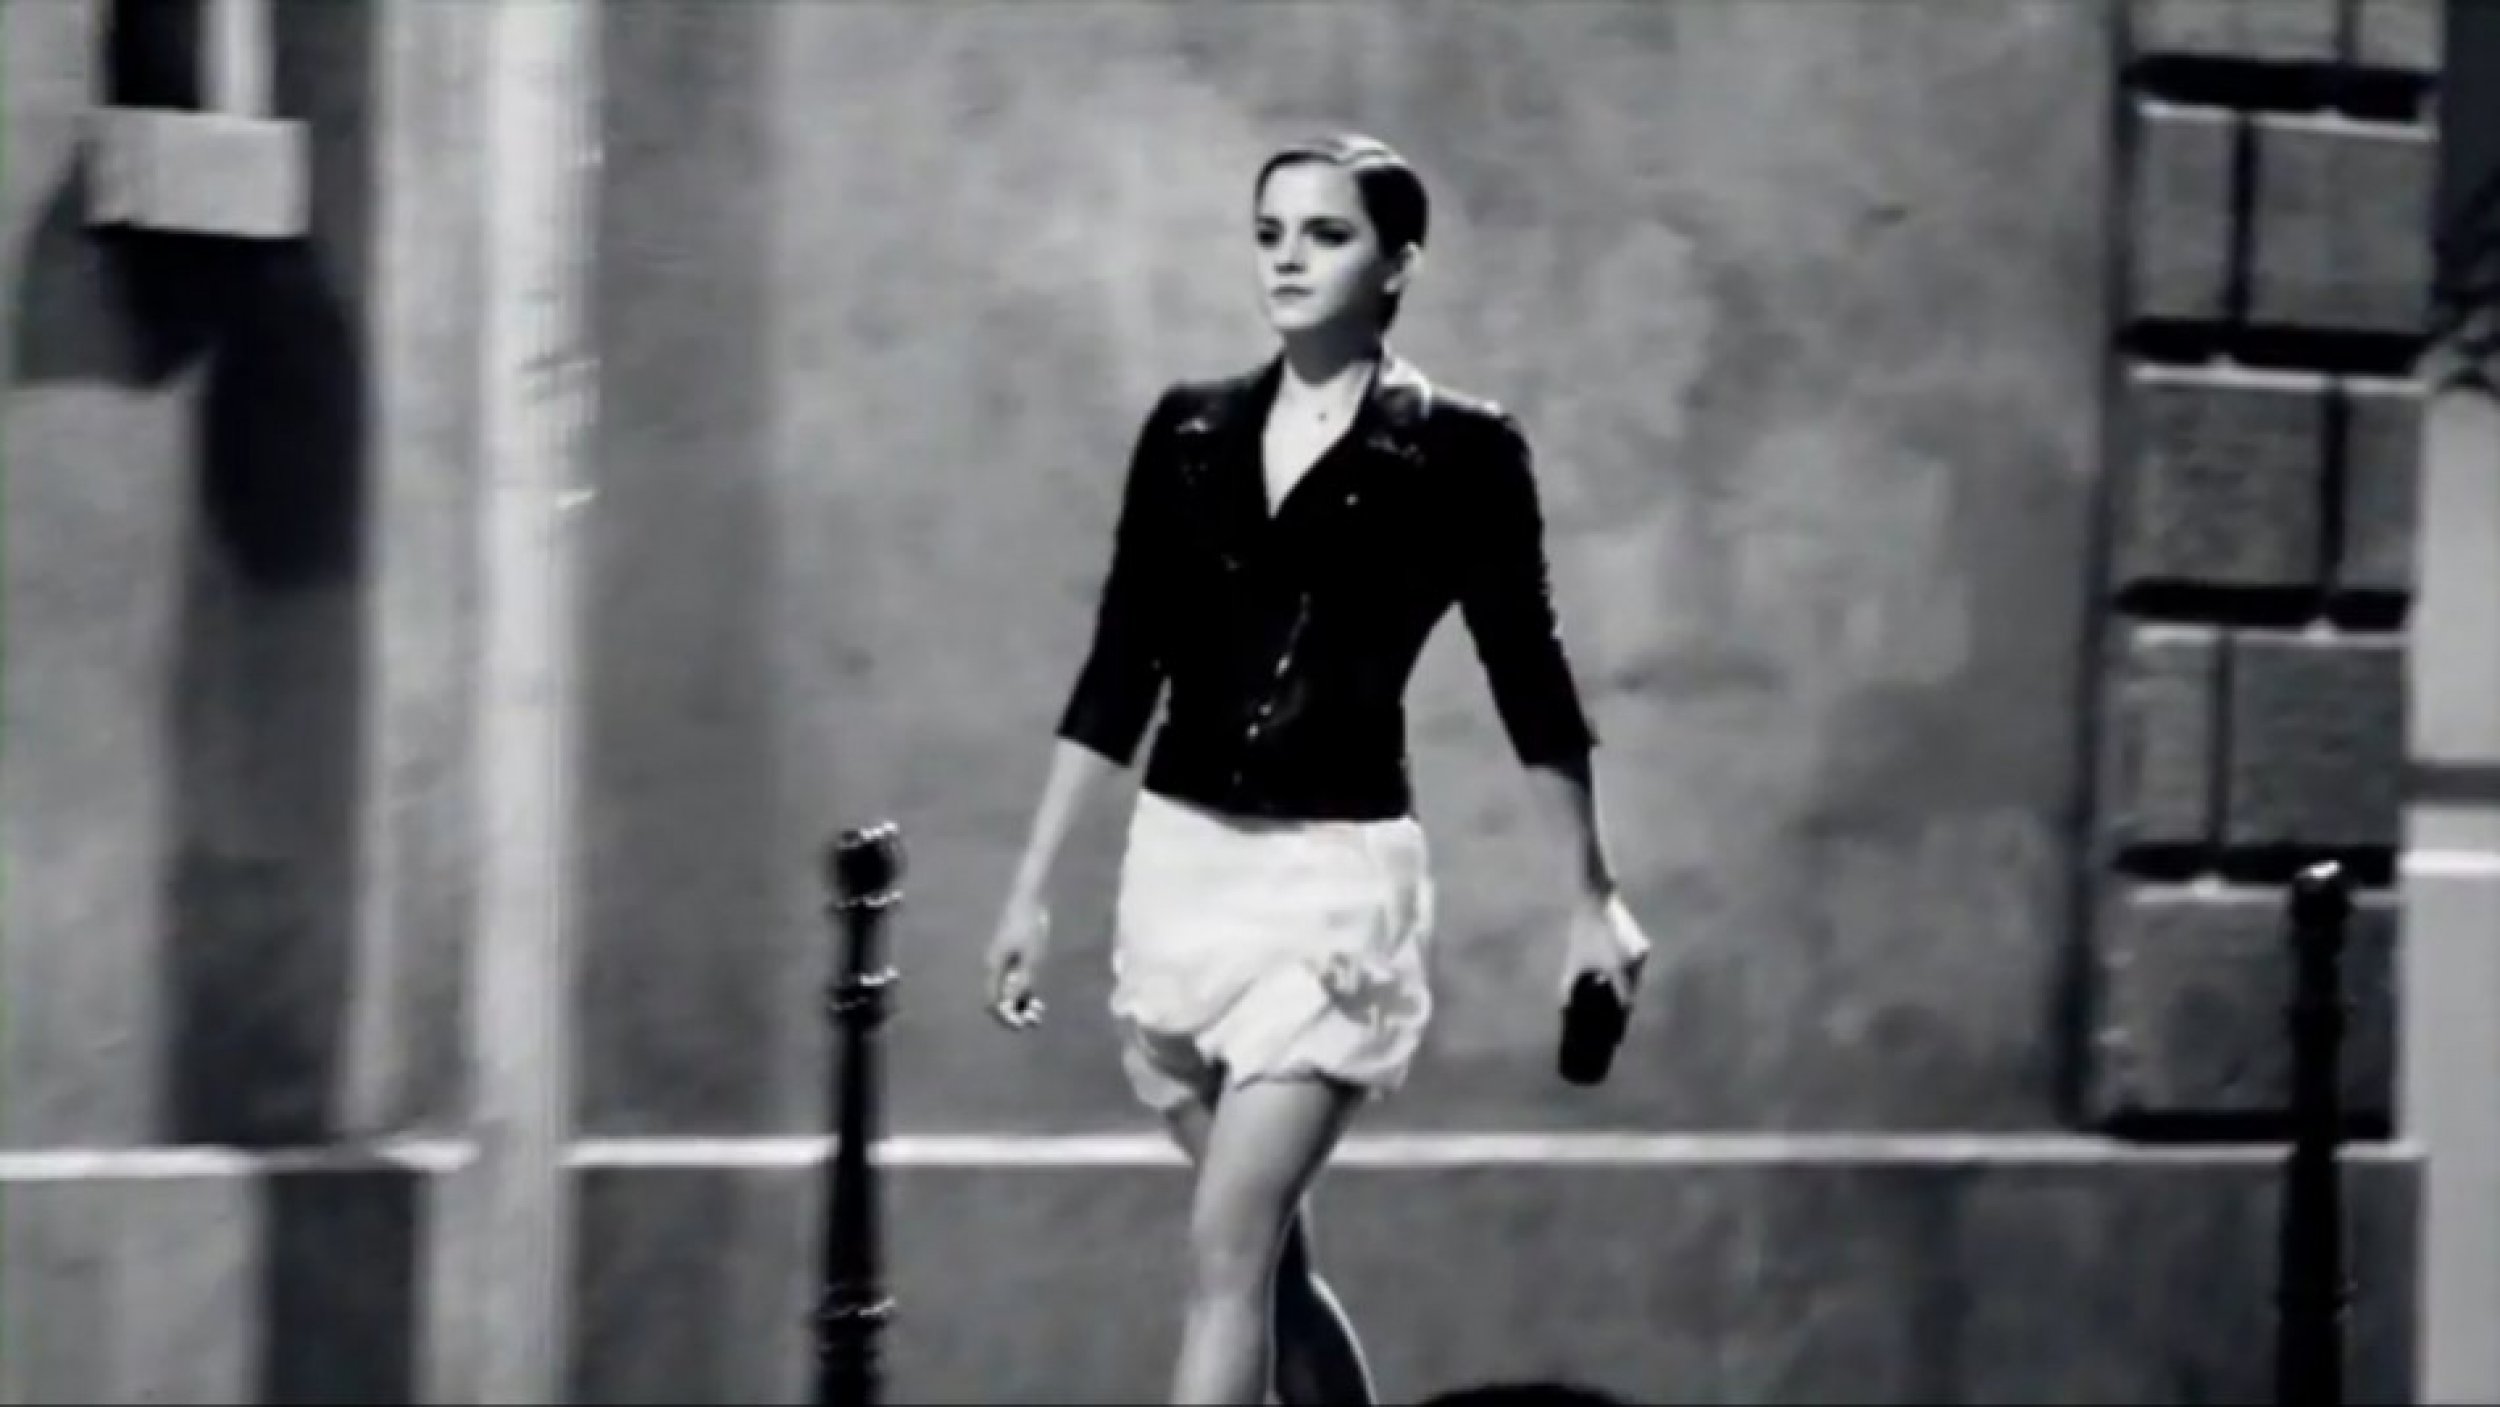 Most Stunning Images Emma Watson Dazzles in New Perfume Ad for Lancme.